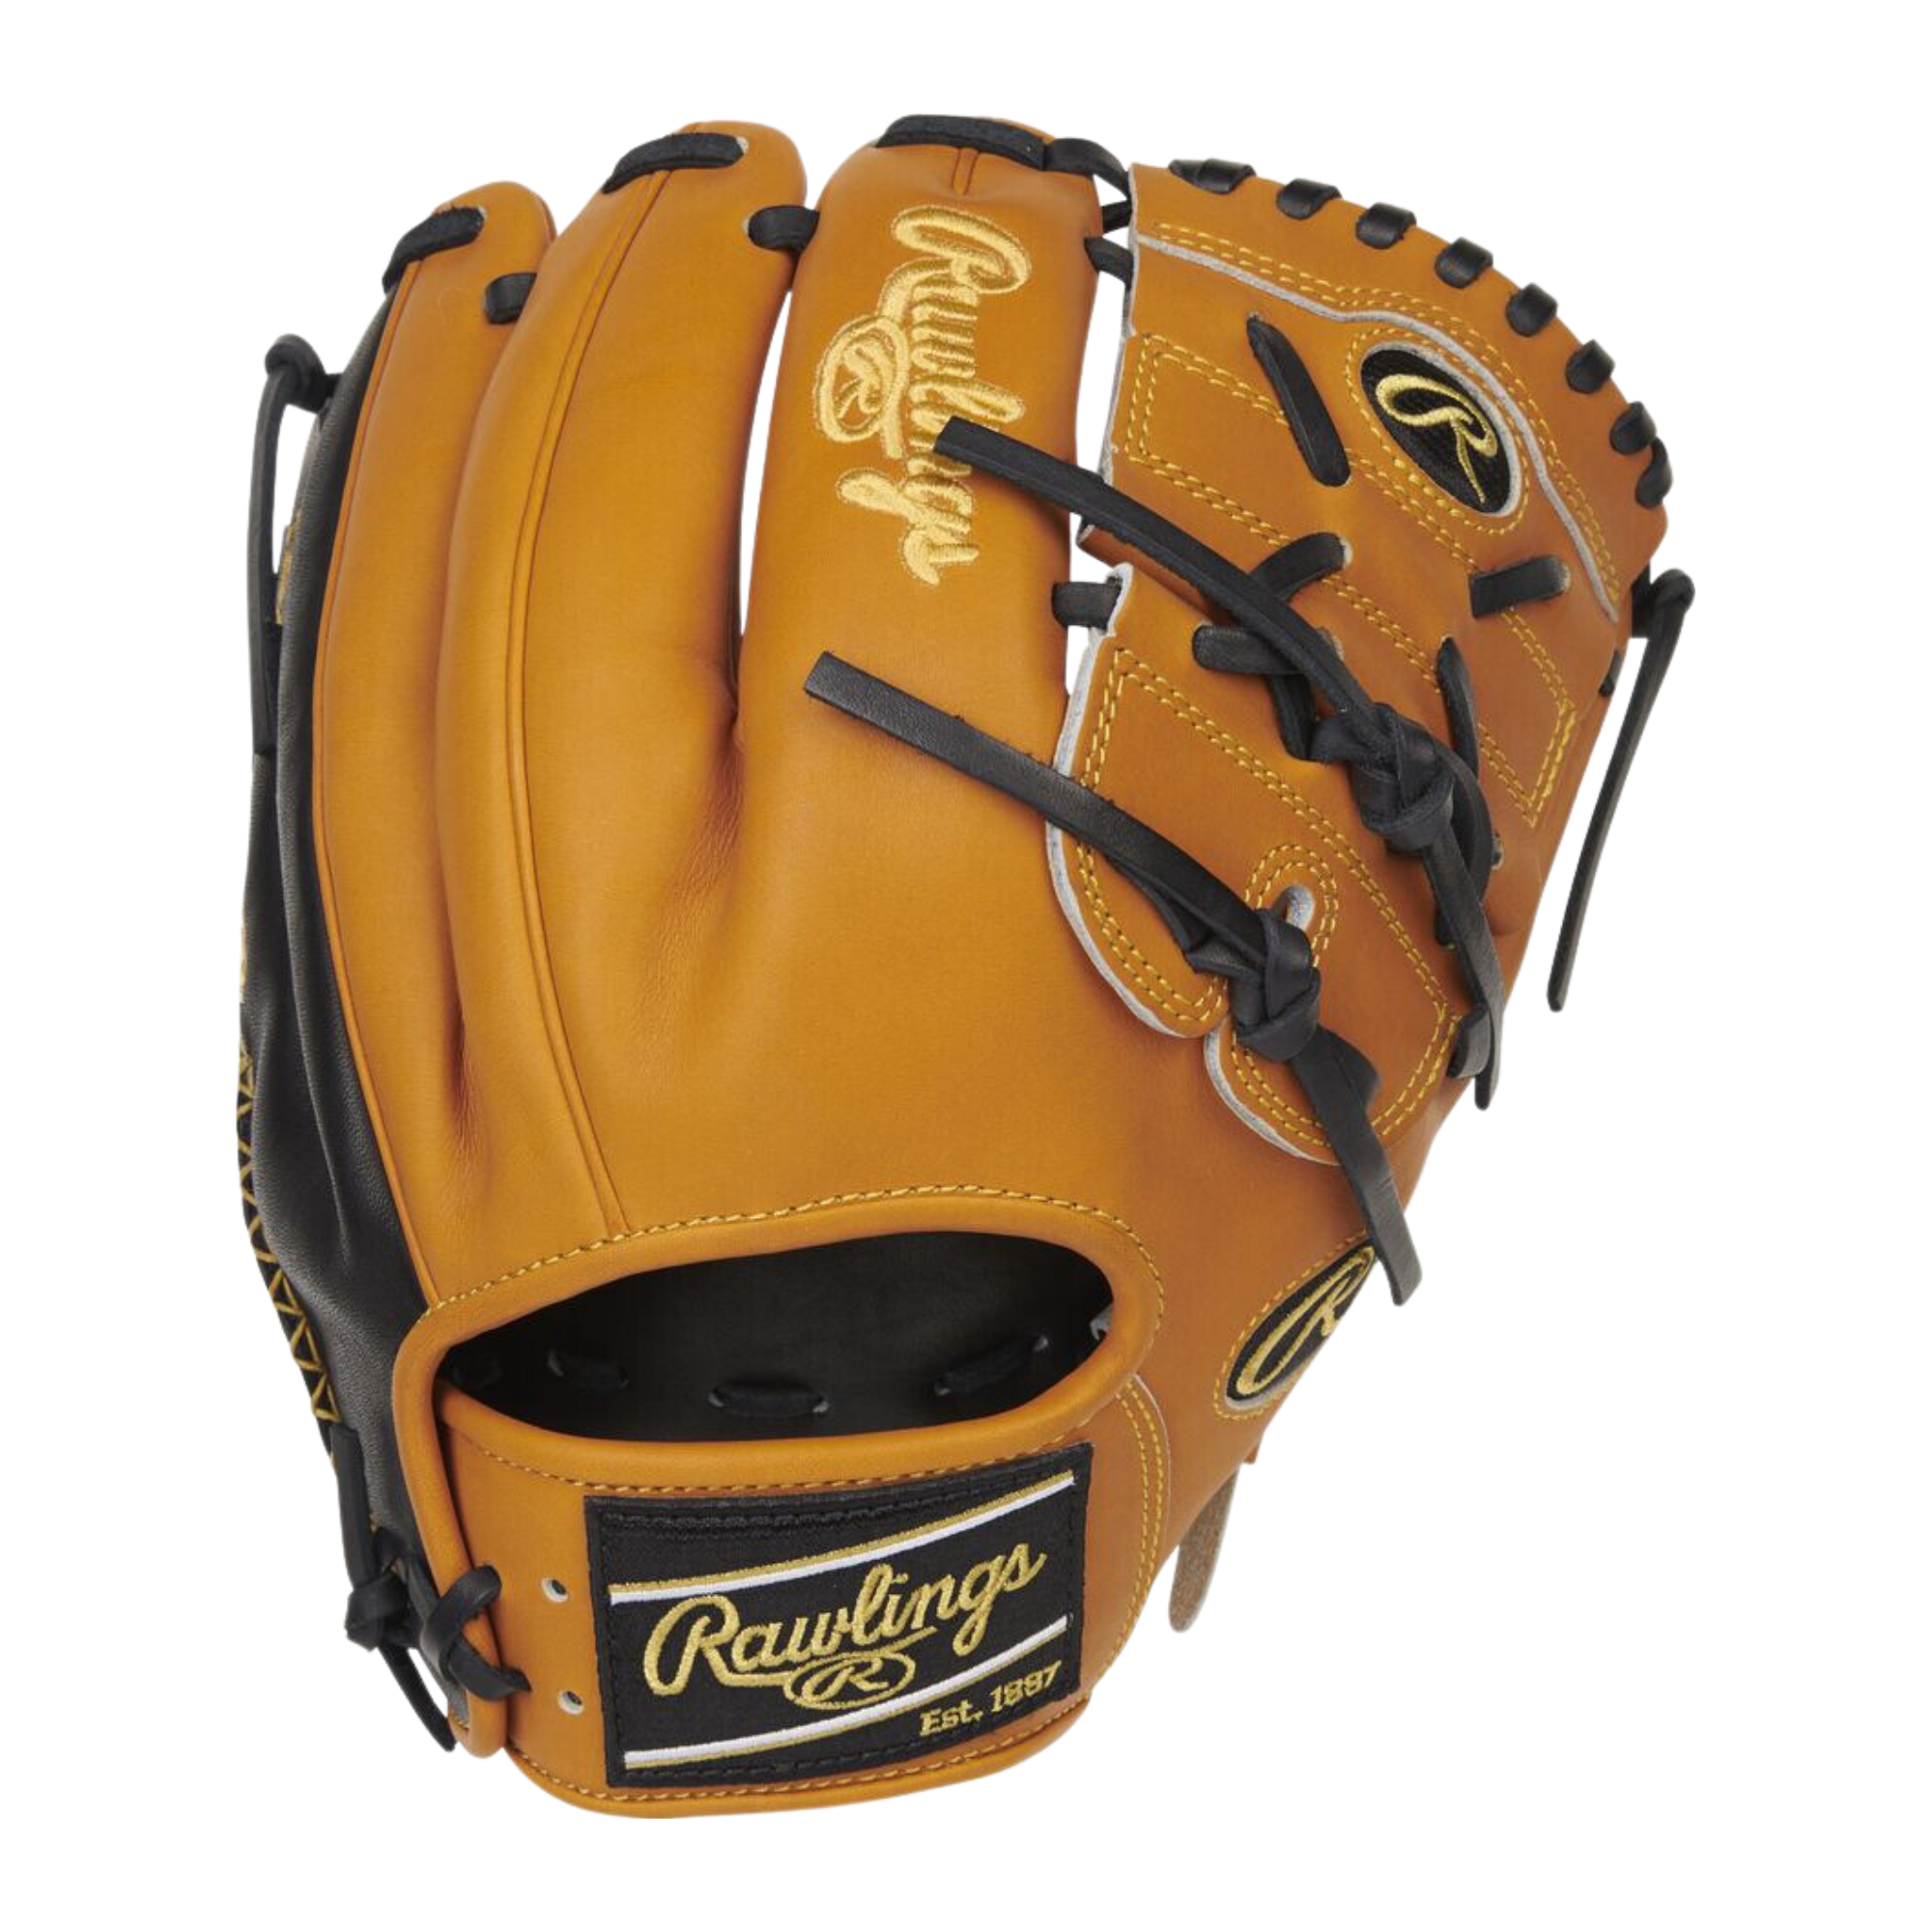 Rawlings Heart of the Hide 11.75-inch Infield/Pitcher's Glove